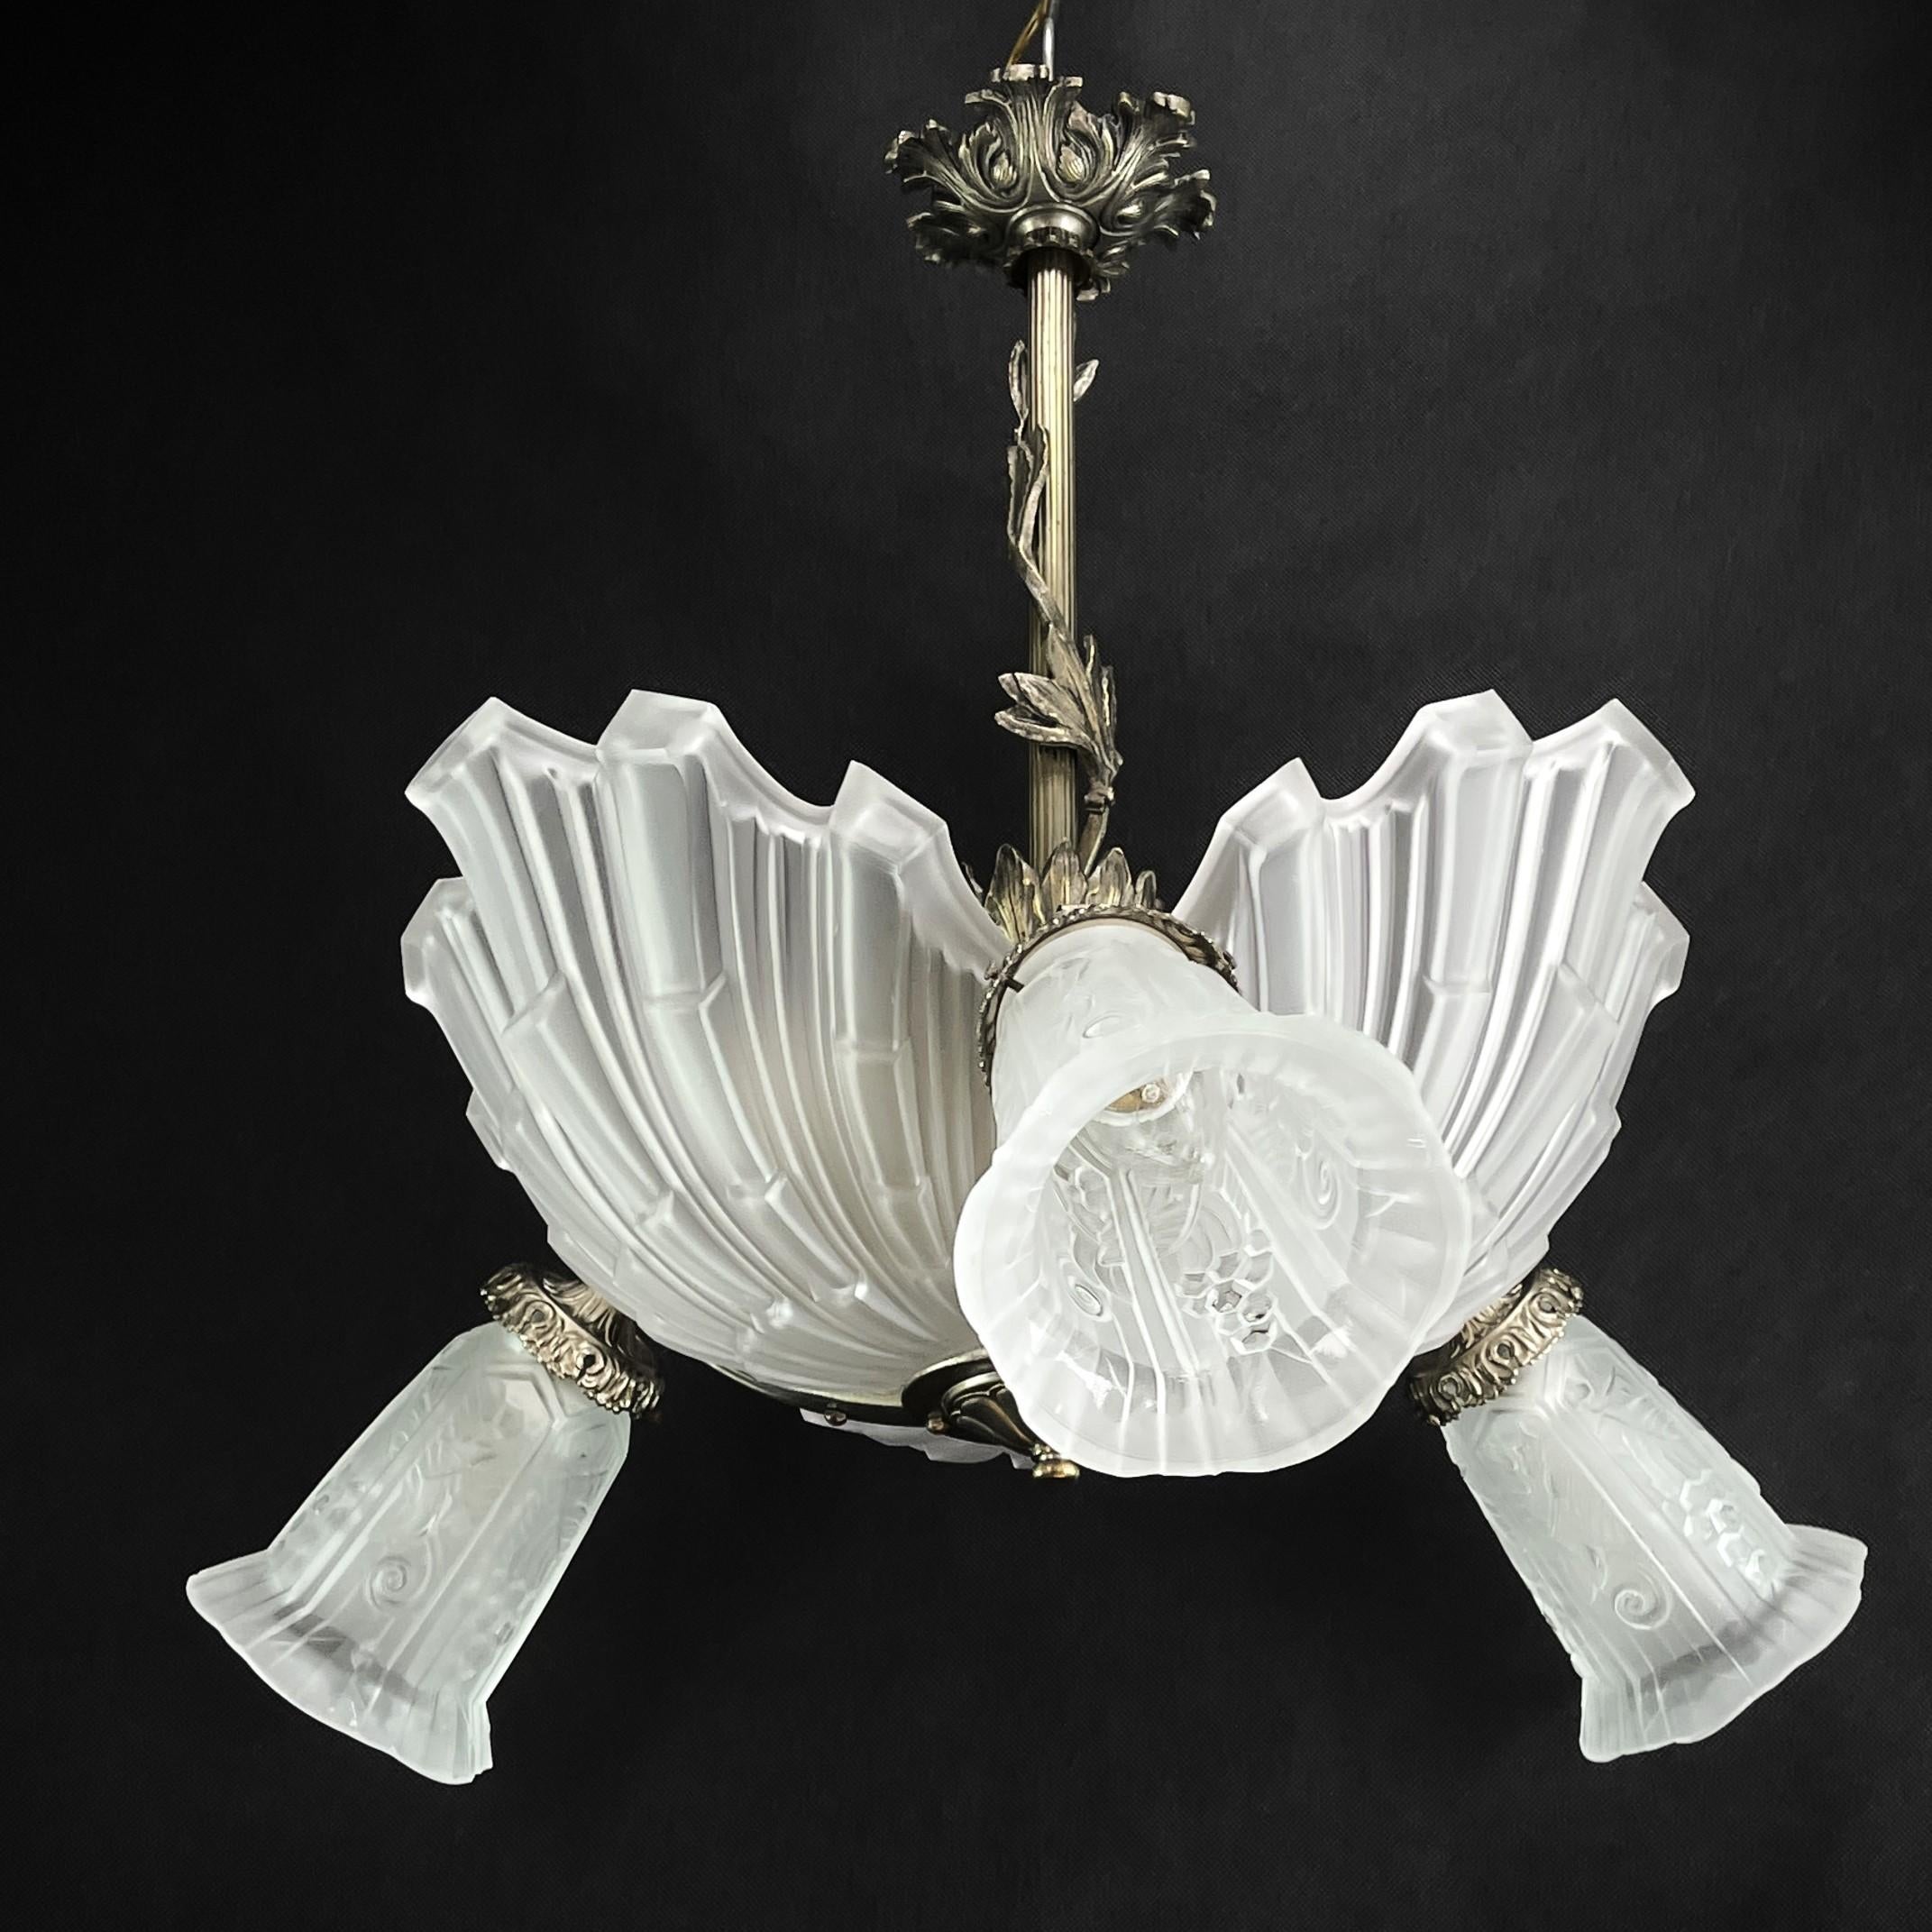 Art Deco Chandelier  by Maynadier - Shell Lamp 1930s

The ART DECO ceiling lamp is a remarkable example of the craftsmanship and style of the early 20th century. 

This ceiling lamp cleverly combines the material metal with the elegance of